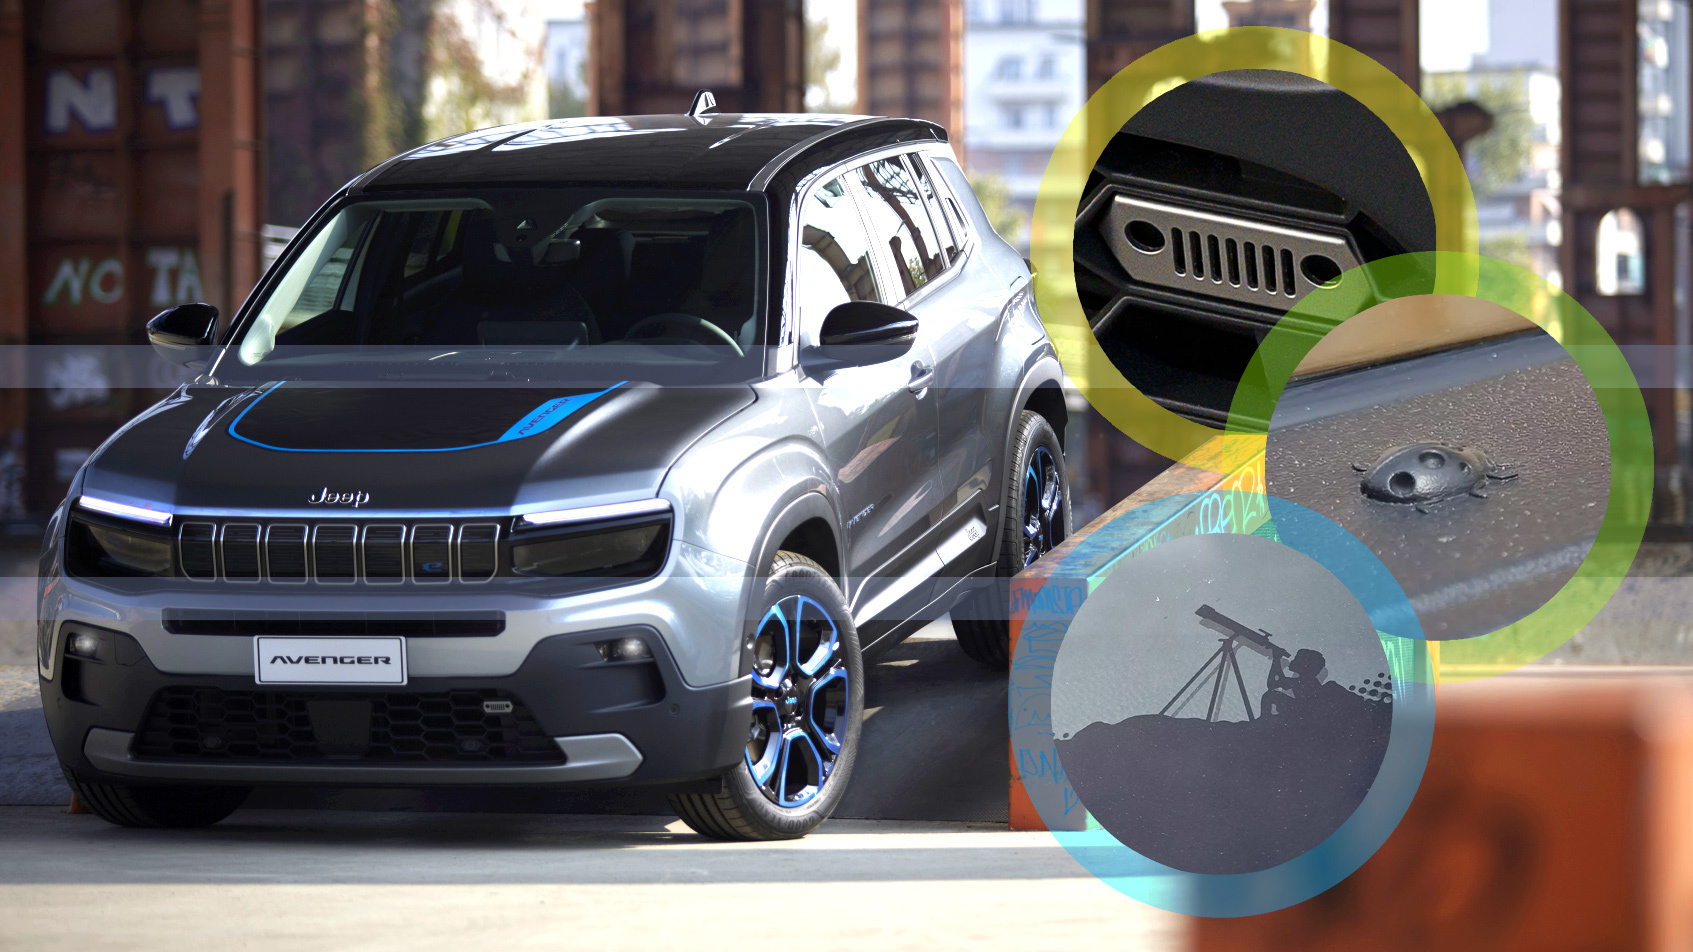 The New Jeep Avenger EV Has Some Fun Easter Eggs Hiding In Plain Sight